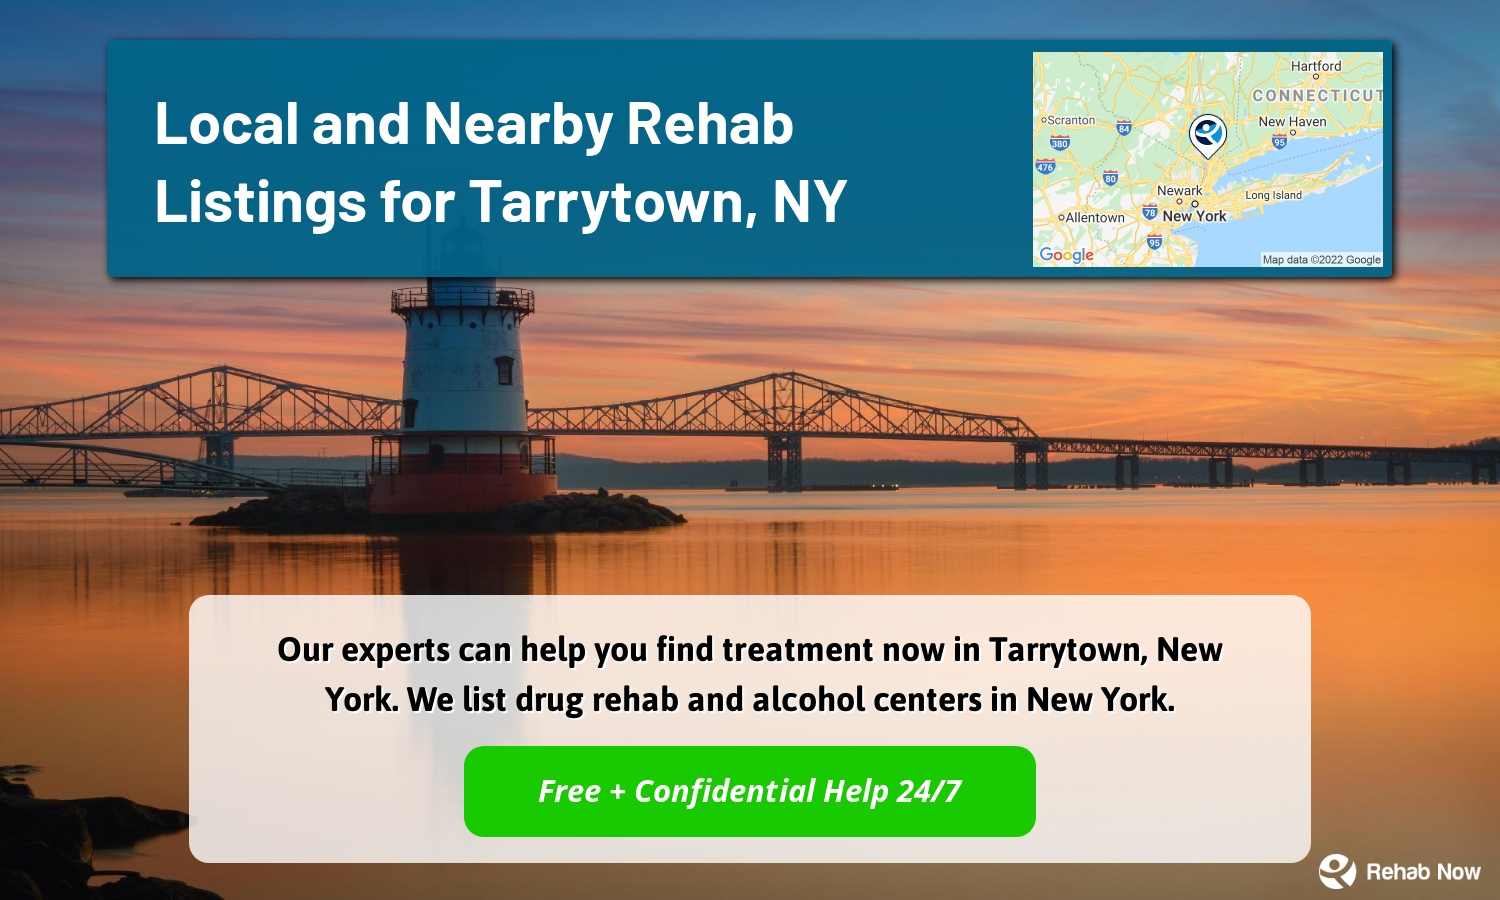 Our experts can help you find treatment now in Tarrytown, New York. We list drug rehab and alcohol centers in New York.